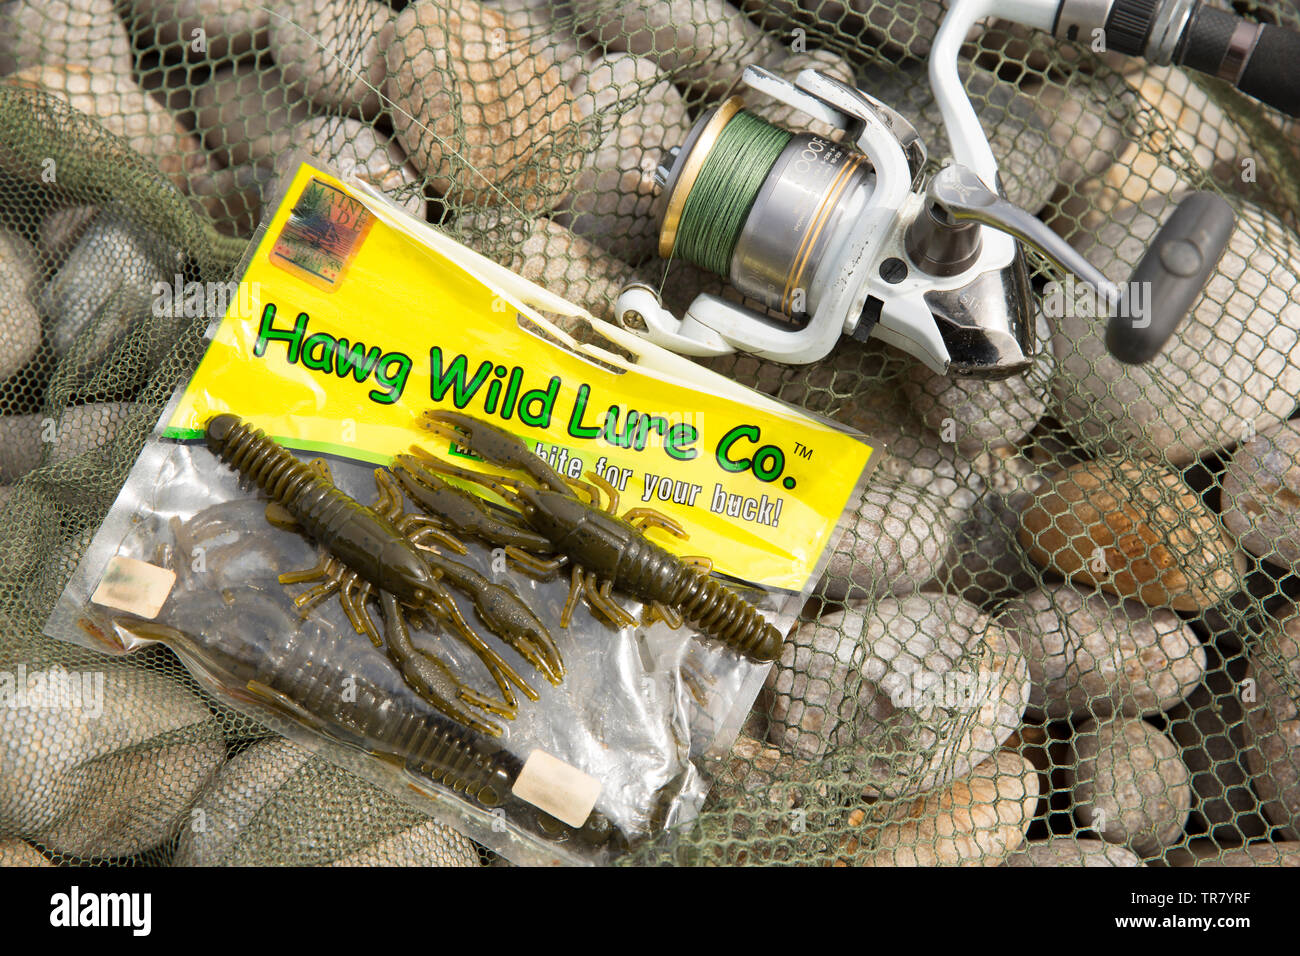 Hawg Wild Lure Co. artificial crayfish baits being used for shor fishing in the UK. Dorset England UK GB Stock Photo